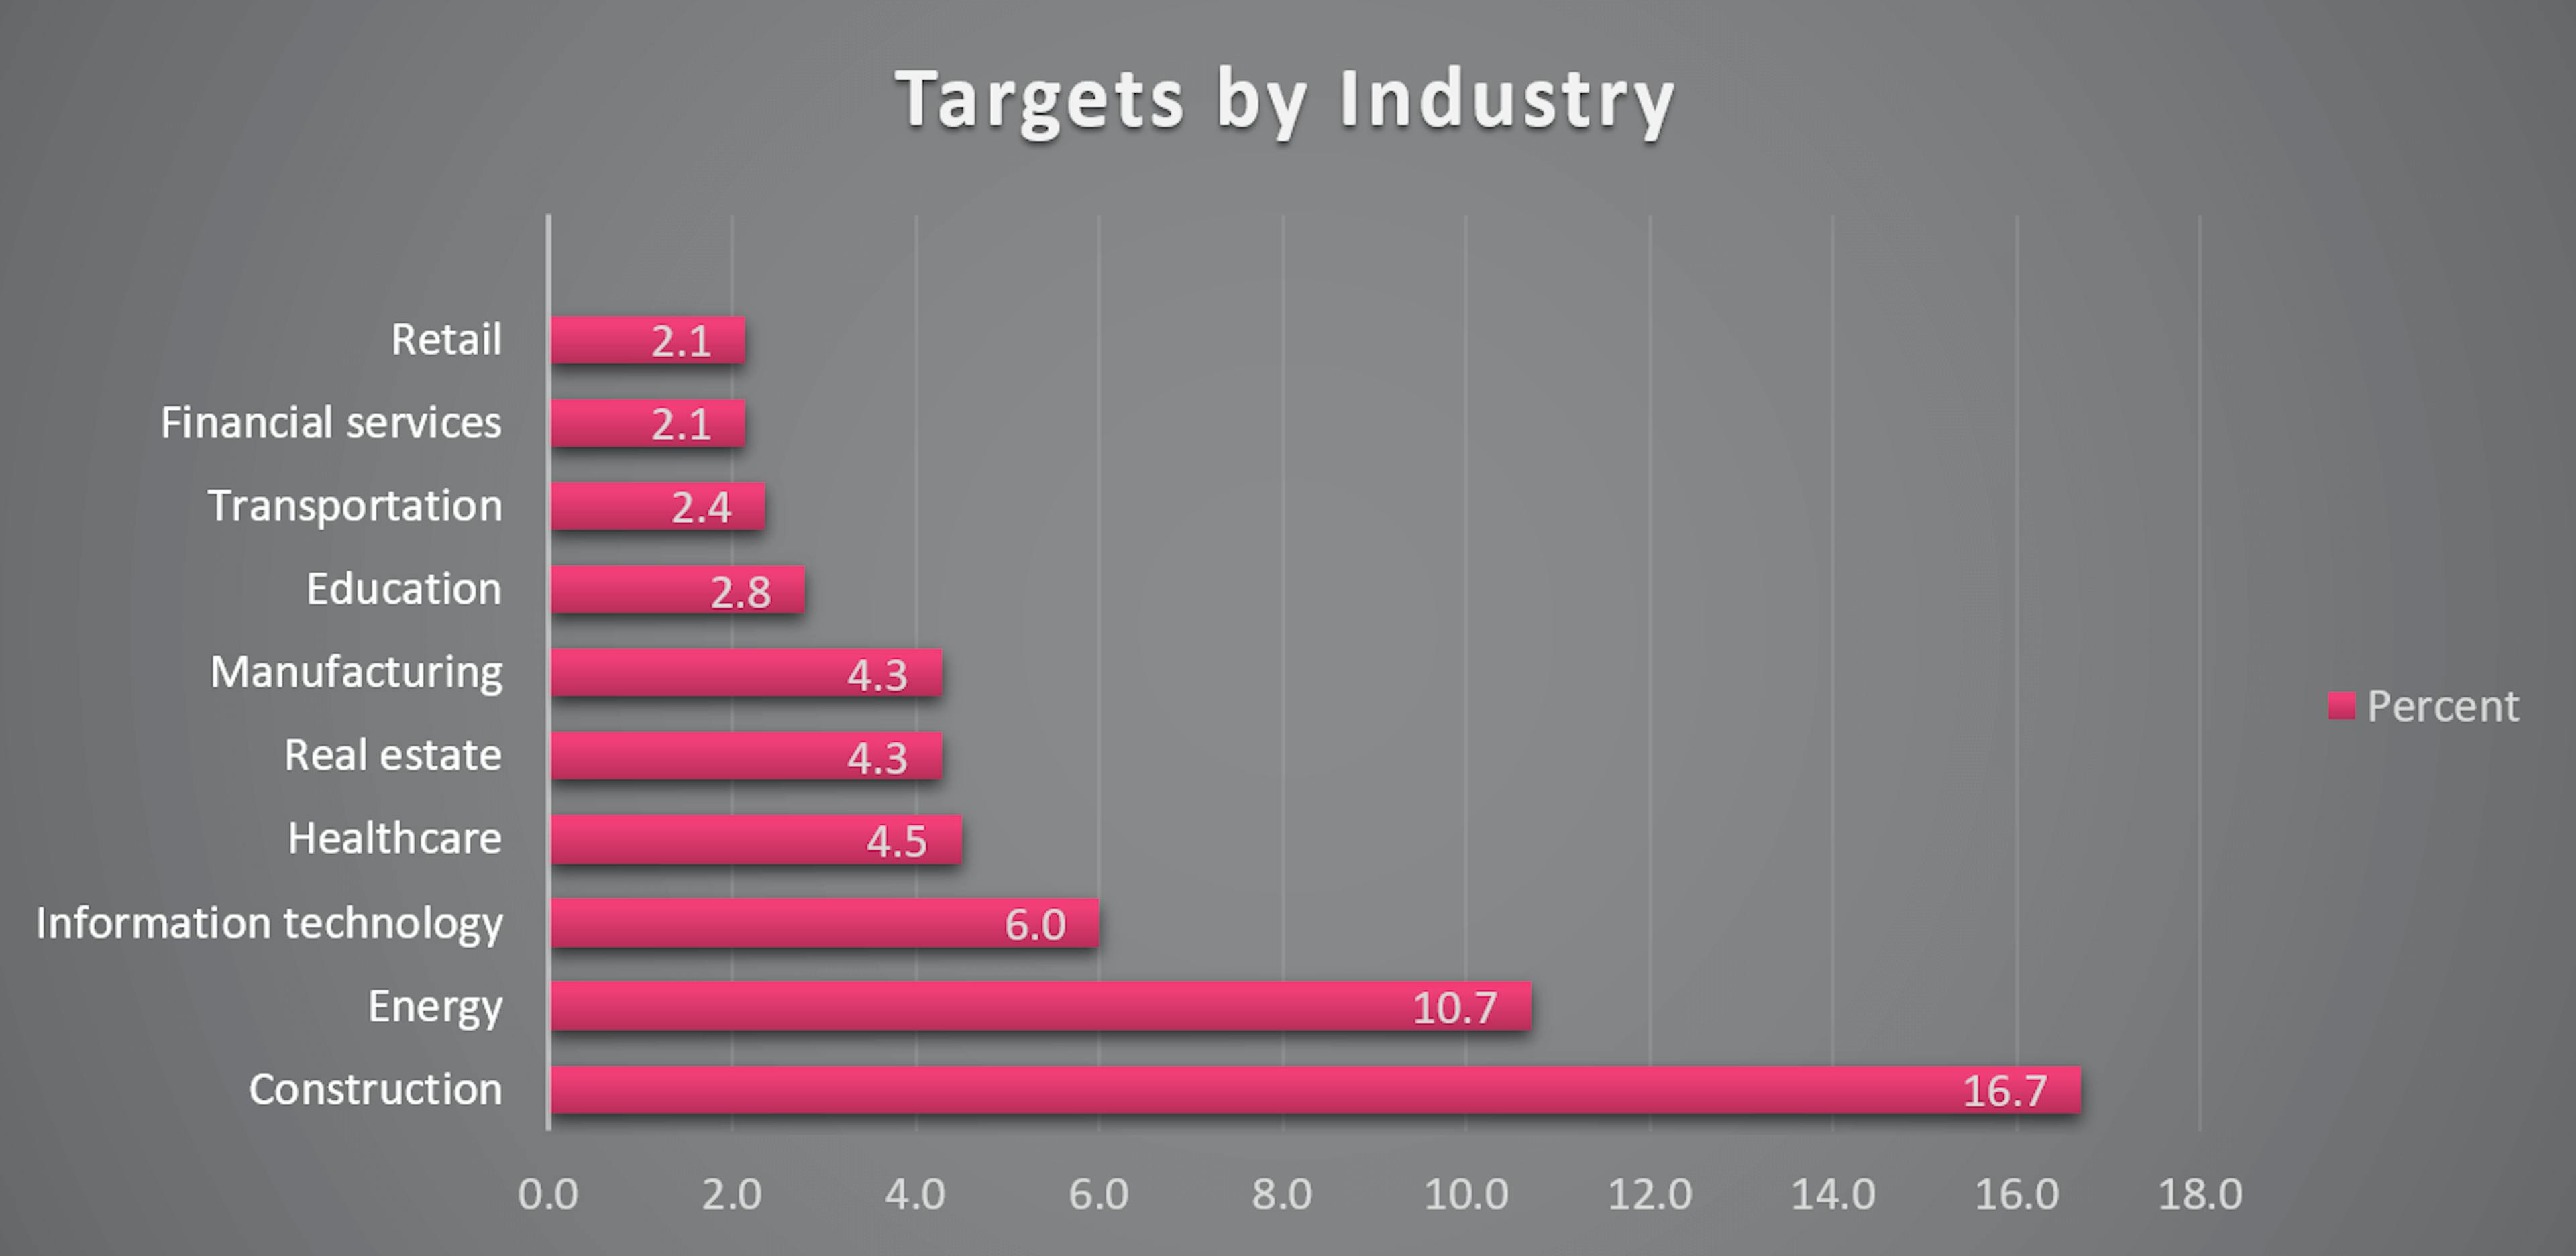 Fi 10: Distribution of targets by industrygure